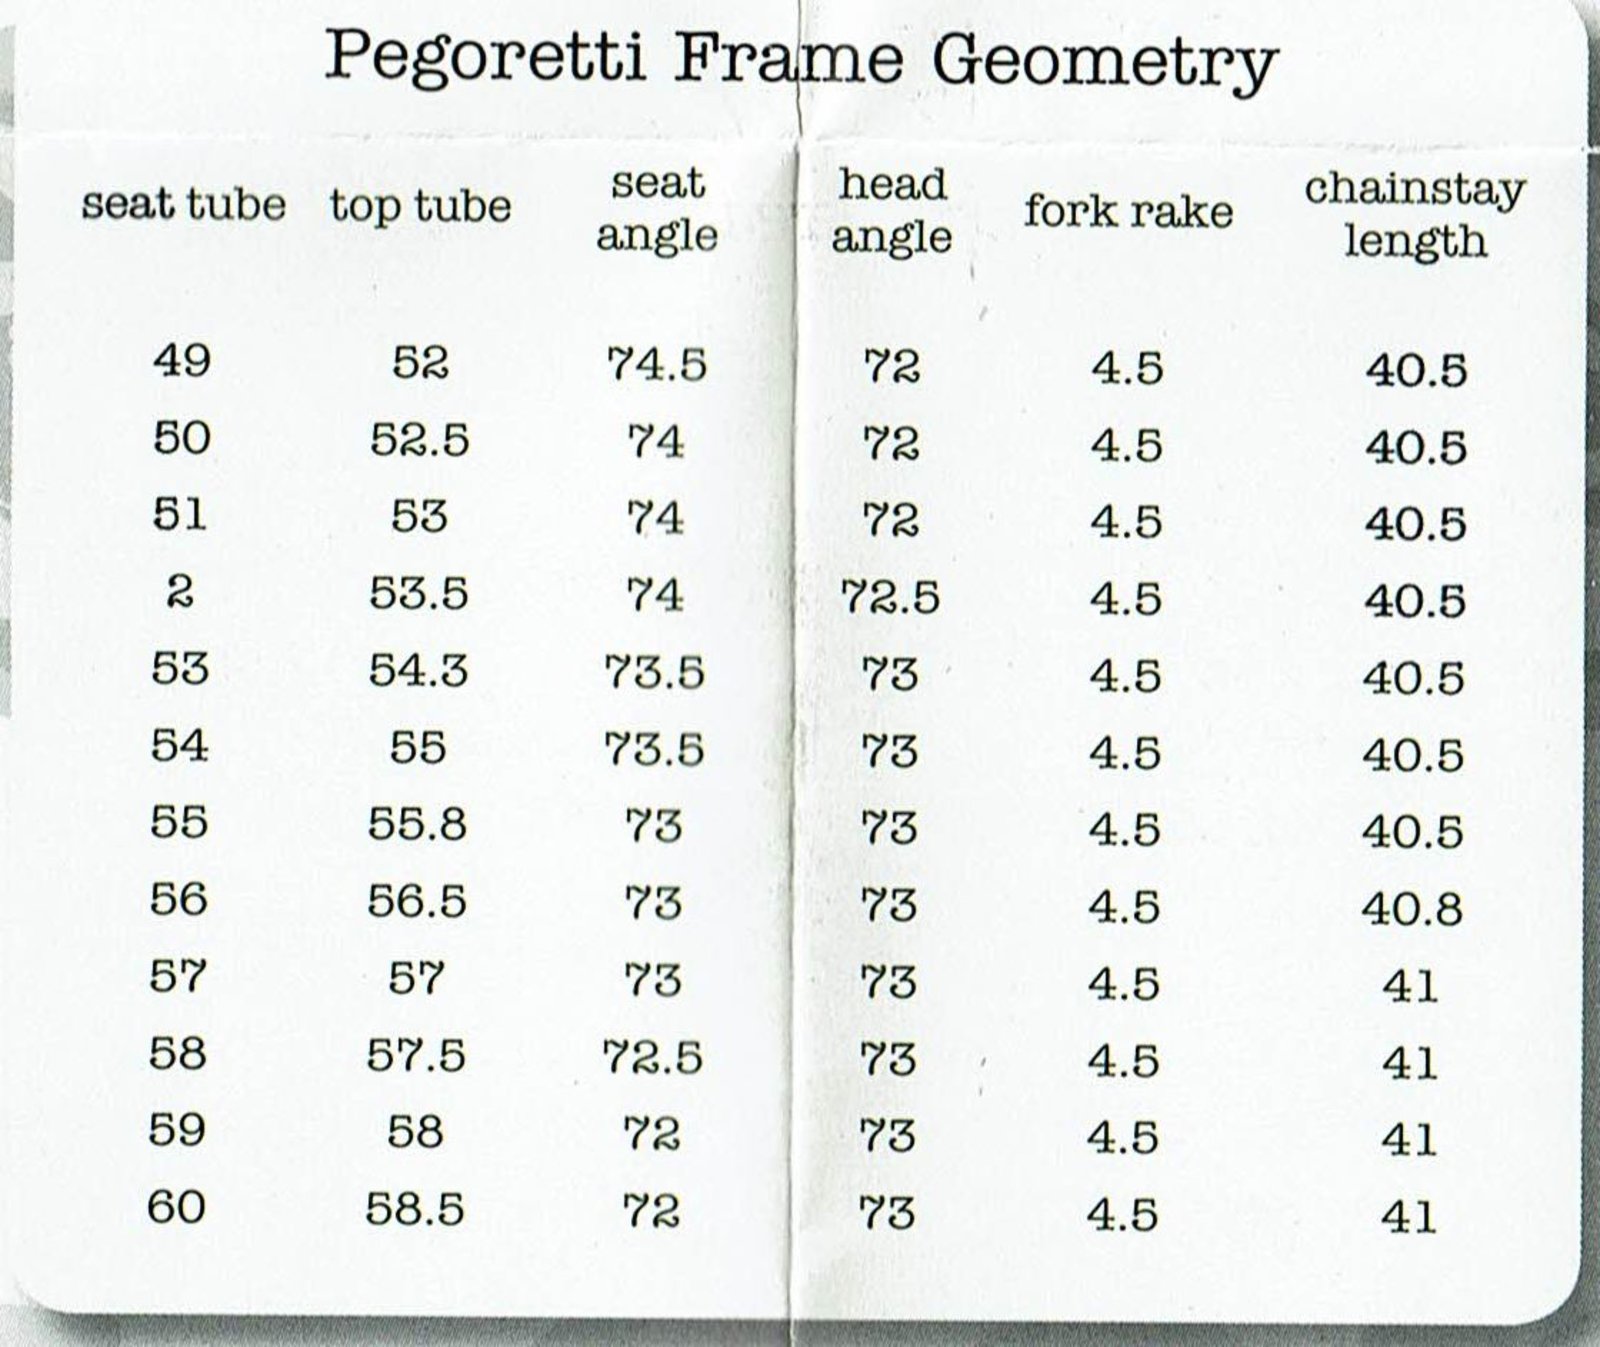 Geometry Chart from the 2004 Pegoretti catalog